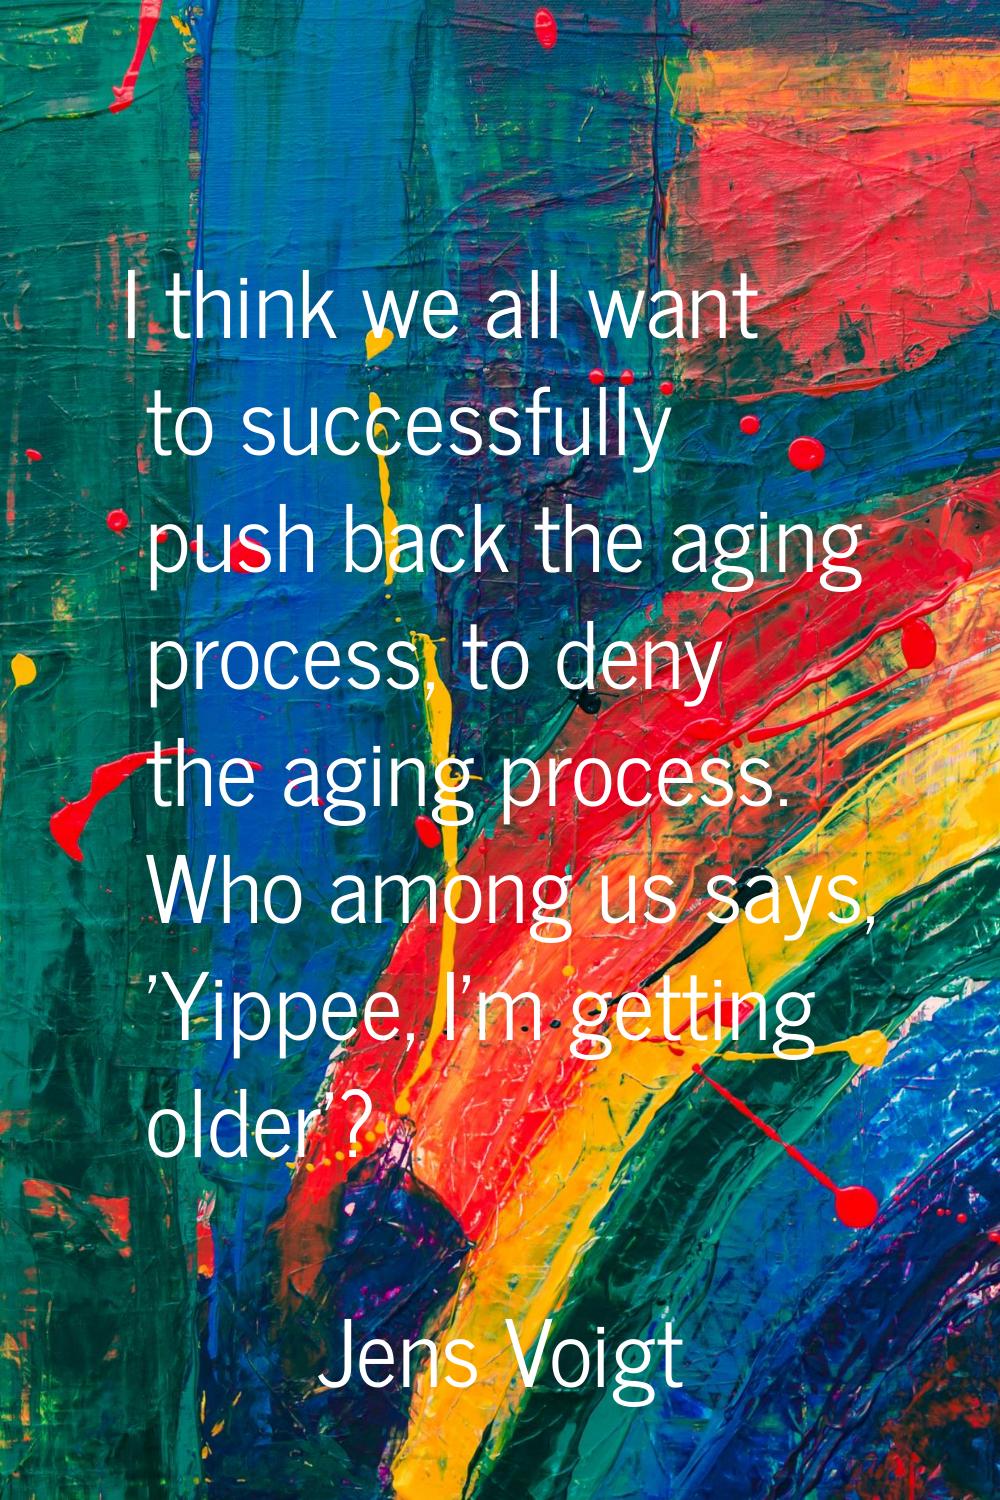 I think we all want to successfully push back the aging process, to deny the aging process. Who amo